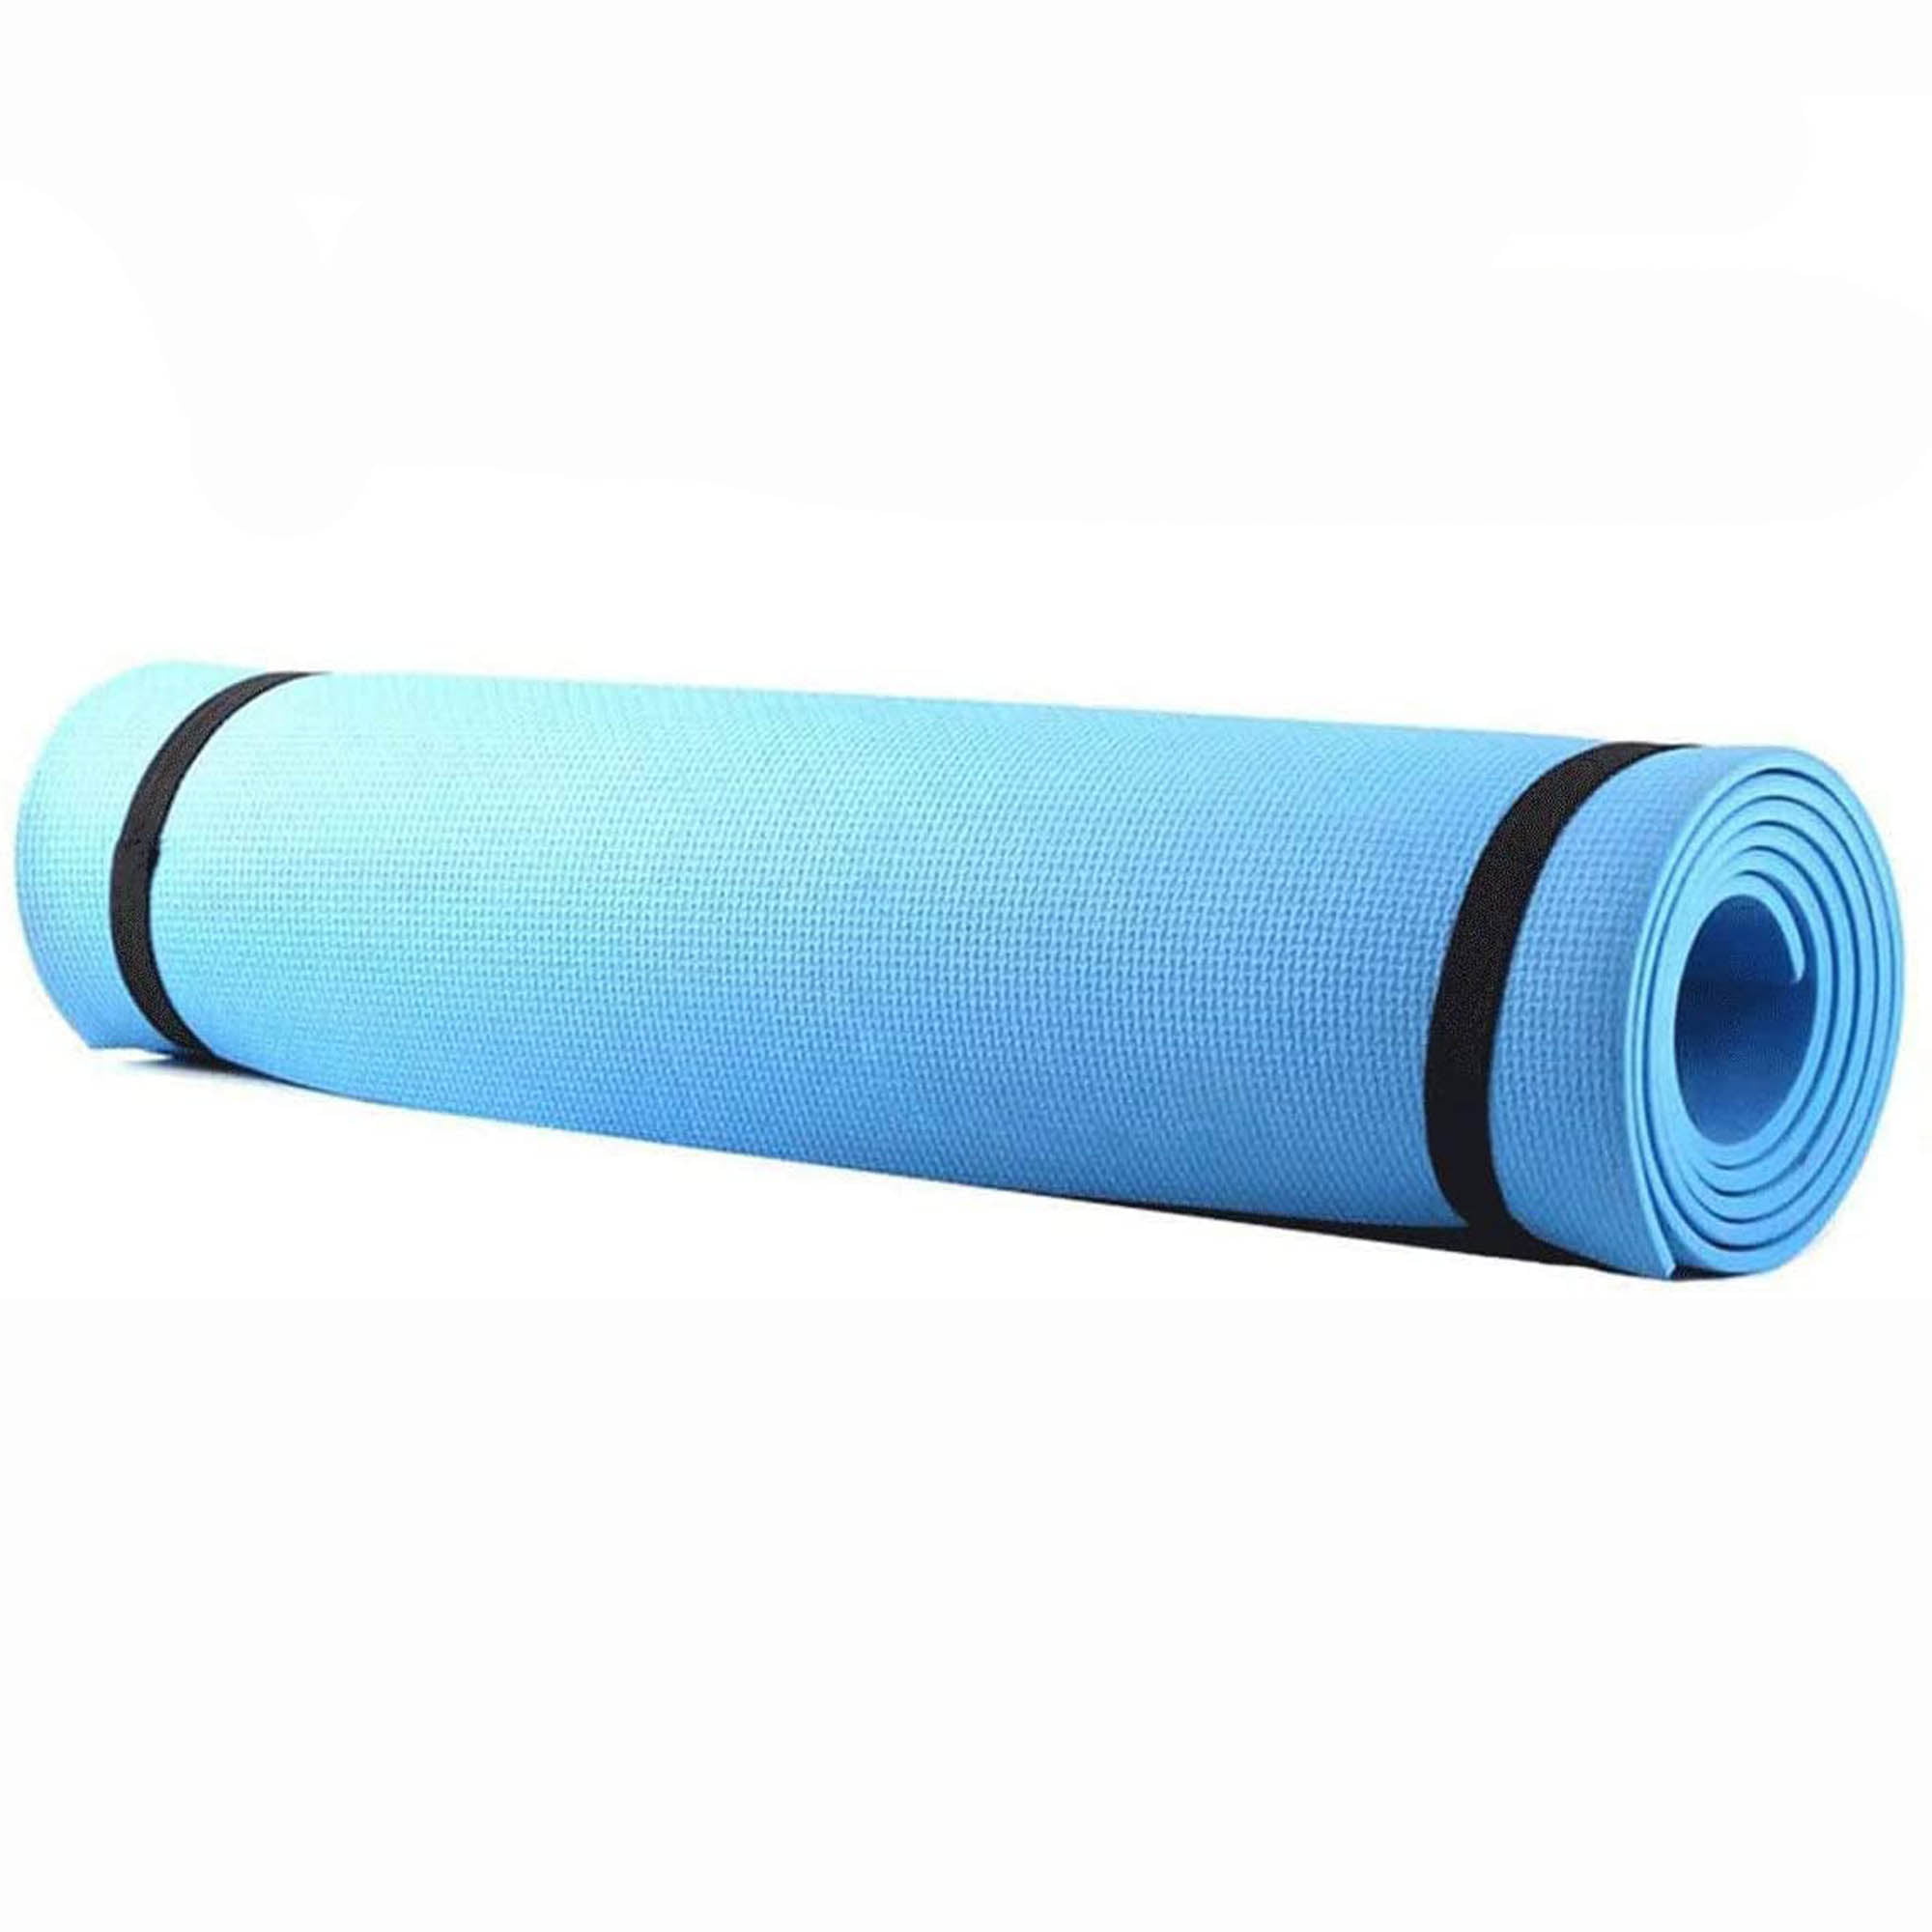 68 x 24 SK Depot™ Yoga Mat EVA Non-Slip Fitness Pad Exercise 5mm Thick Yoga Mat Workout Mat for Gym Pilates Floor Exercises Gymnastics All Purpose Gym Mats for Home Workout